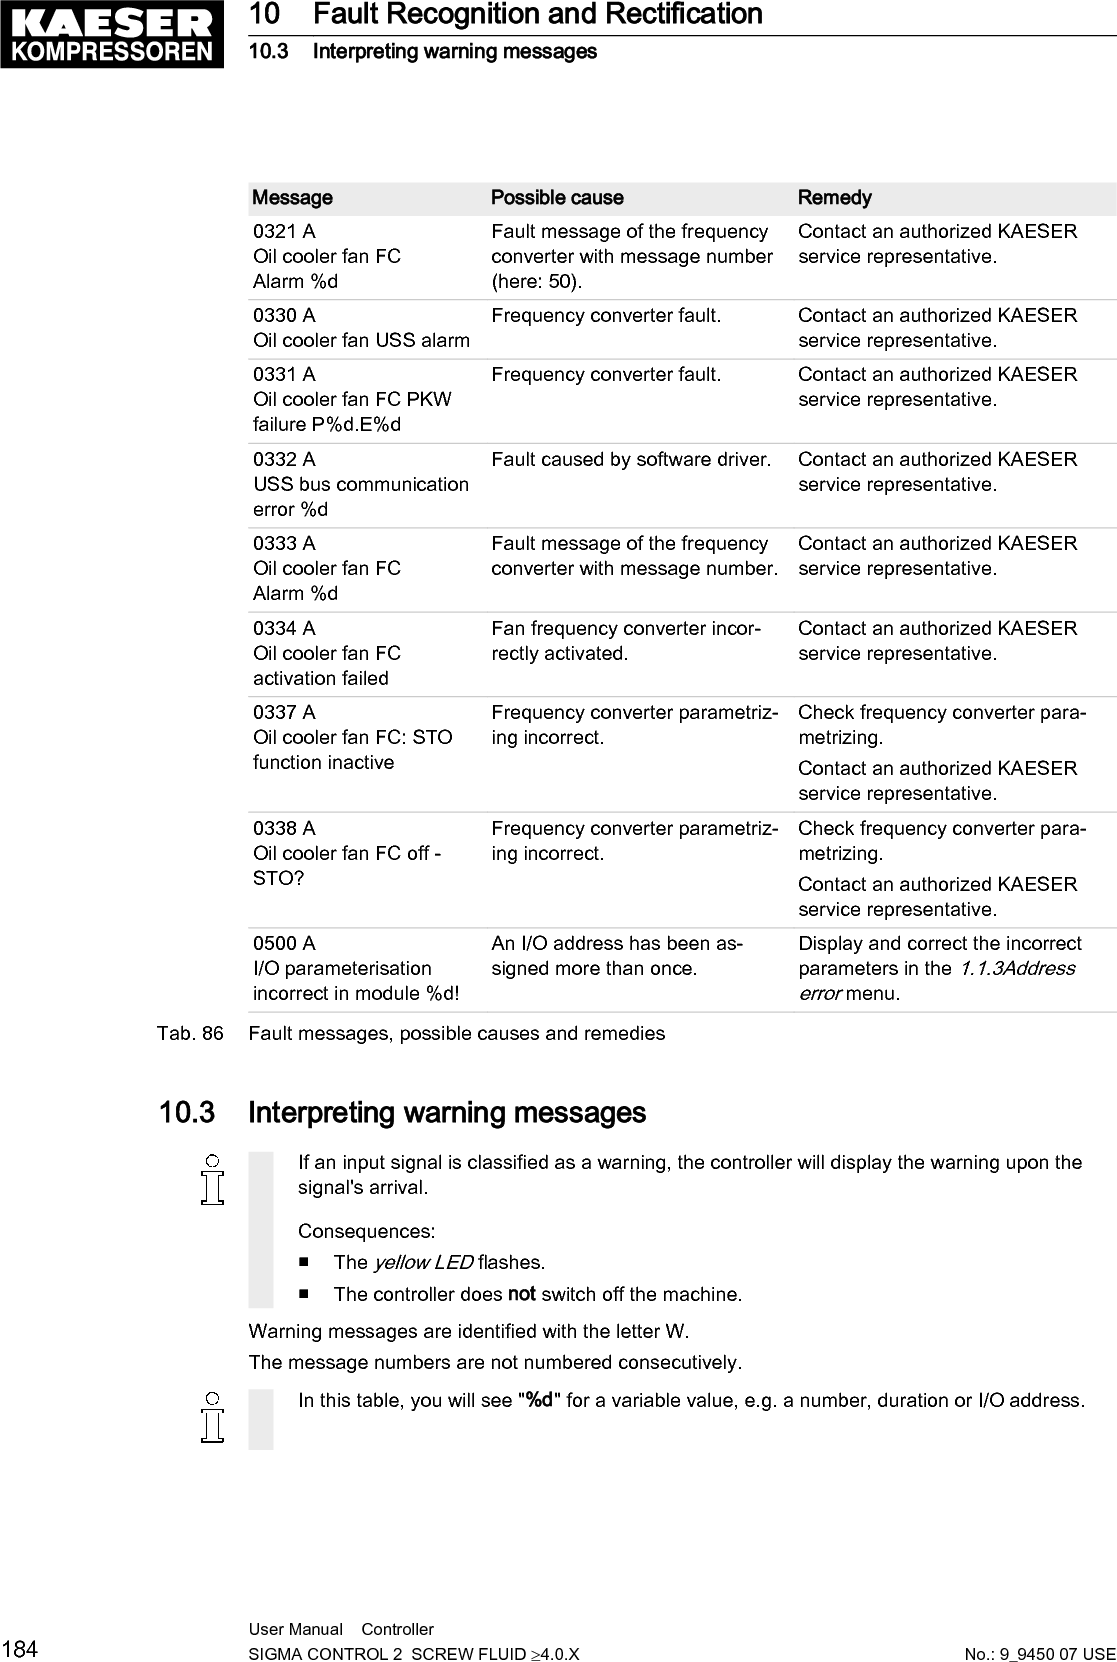 1) Messages 0073–0078 and 0081–0096 are customer-specific and may differ from the suggestedvalues.Complete them in the table below with your defined message text, possible causes and remedies(see chapter 8.11).Message Possible cause Remedy0001 WEquipment numberincompleteEquipment number entered incompletelyor not at all.Contact an authorizedKAESER service representa‐tive.0002 WMotor temperature ↑Drive motor overheating. Keep ambient conditions with‐in specified limits.Check the cooling air supply.Clean the motor.0004 WOil separator Δp ↑Increased differential pressure of the oilseparator cartridge.Oil separator cartridge clogged.Change the oil separator car‐tridge.0008 WAirend dischargetemperature ADT ↑Maximum airend discharge temperaturewill soon be reached.Clean the cooler.Check the cooling oil level.Replace the oil filter element.Ensure adequate ventilation.Keep surrounding tempera‐ture within recommended lim‐its.0011 WOil filter Δp ↑Increased pressure differential of the oilfilter.Oil filter clogged.Change the oil filter.0013 WAir filter Δp ↑Air filter clogged. Change the air filter.0015 WCom-Modulecommunication errorThe bus link via PROFIBUS interface isinterrupted.Check bus lines and plug.0021 WRefrigeration dryer T ⇟Refrigerated dryer:Compressed air temperature too low.Keep ambient conditions with‐in specified limits.Contact an authorizedKAESER service representa‐tive.0024 WMains contactoroperations ⇞The maximum permissible number ofswitching cycles has been exceeded.Have the main contactor re‐placed by an authorizedKAESER service representa‐tive.0025 WOil separator h ⇞Oil separator cartridge:Maintenance interval has elapsed.Change the oil separator car‐tridge.0026 WOil change h ⇞Cooling oil:Maintenance interval has elapsed.Change the cooling oil.0027 WOil filter h ⇞Oil filter:Maintenance interval has elapsed.Change the oil filter.10 Fault Recognition and Rectification10.3 Interpreting warning messagesNo.: 9_9450 07 USEUser Manual    Controller  SIGMA CONTROL 2  SCREW FLUID ≥4.0.X 185